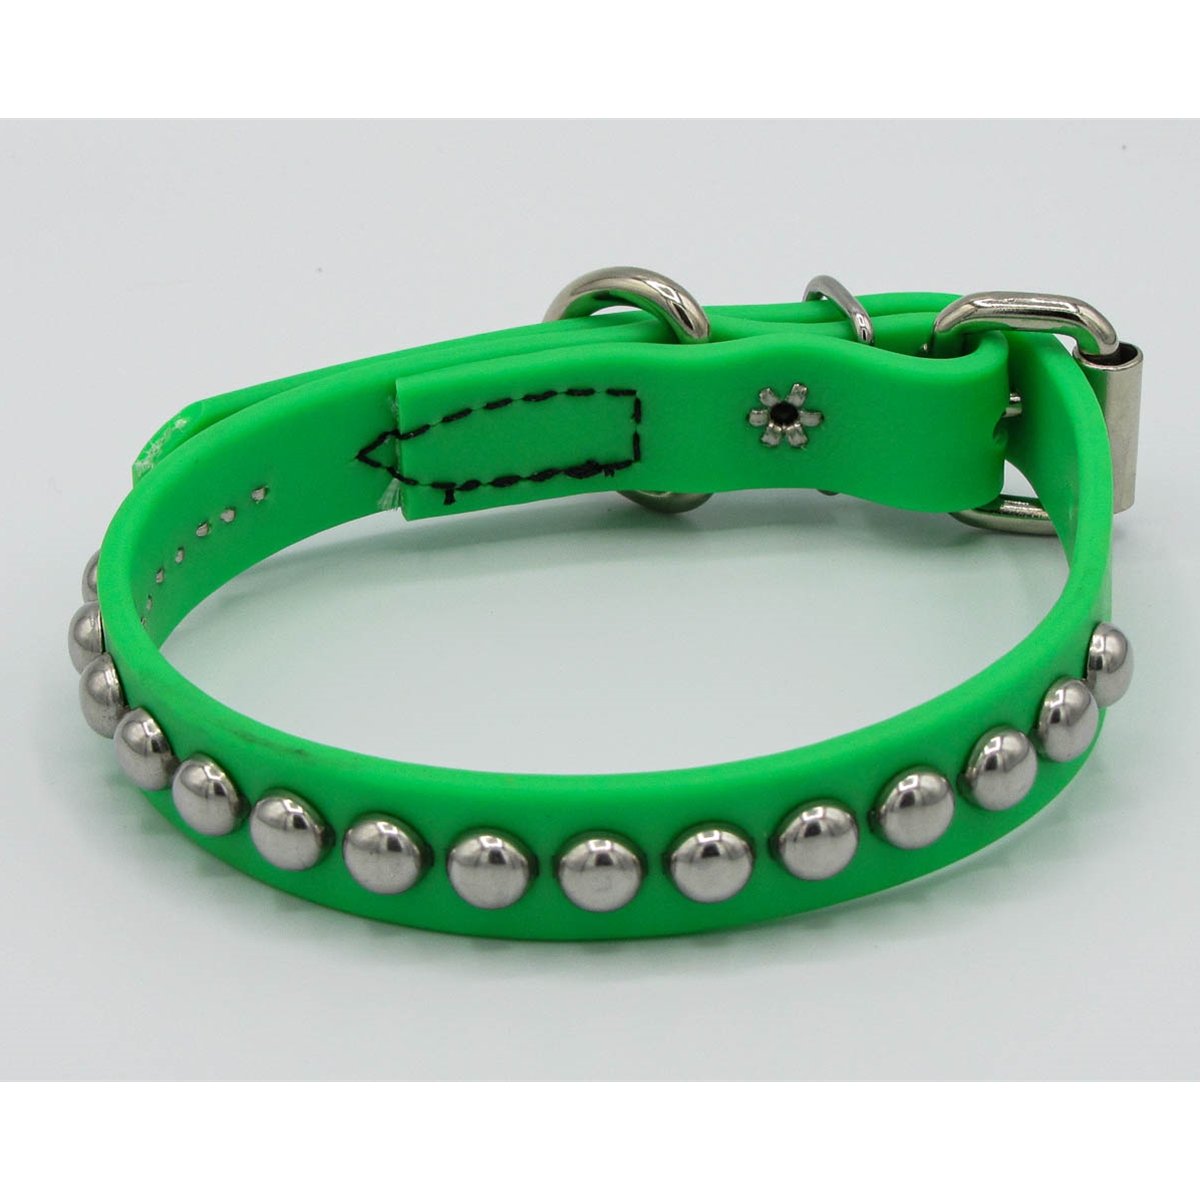 Shop Dog Collars Made from Beta Biothane with Silver Studs- Two Horse Tack